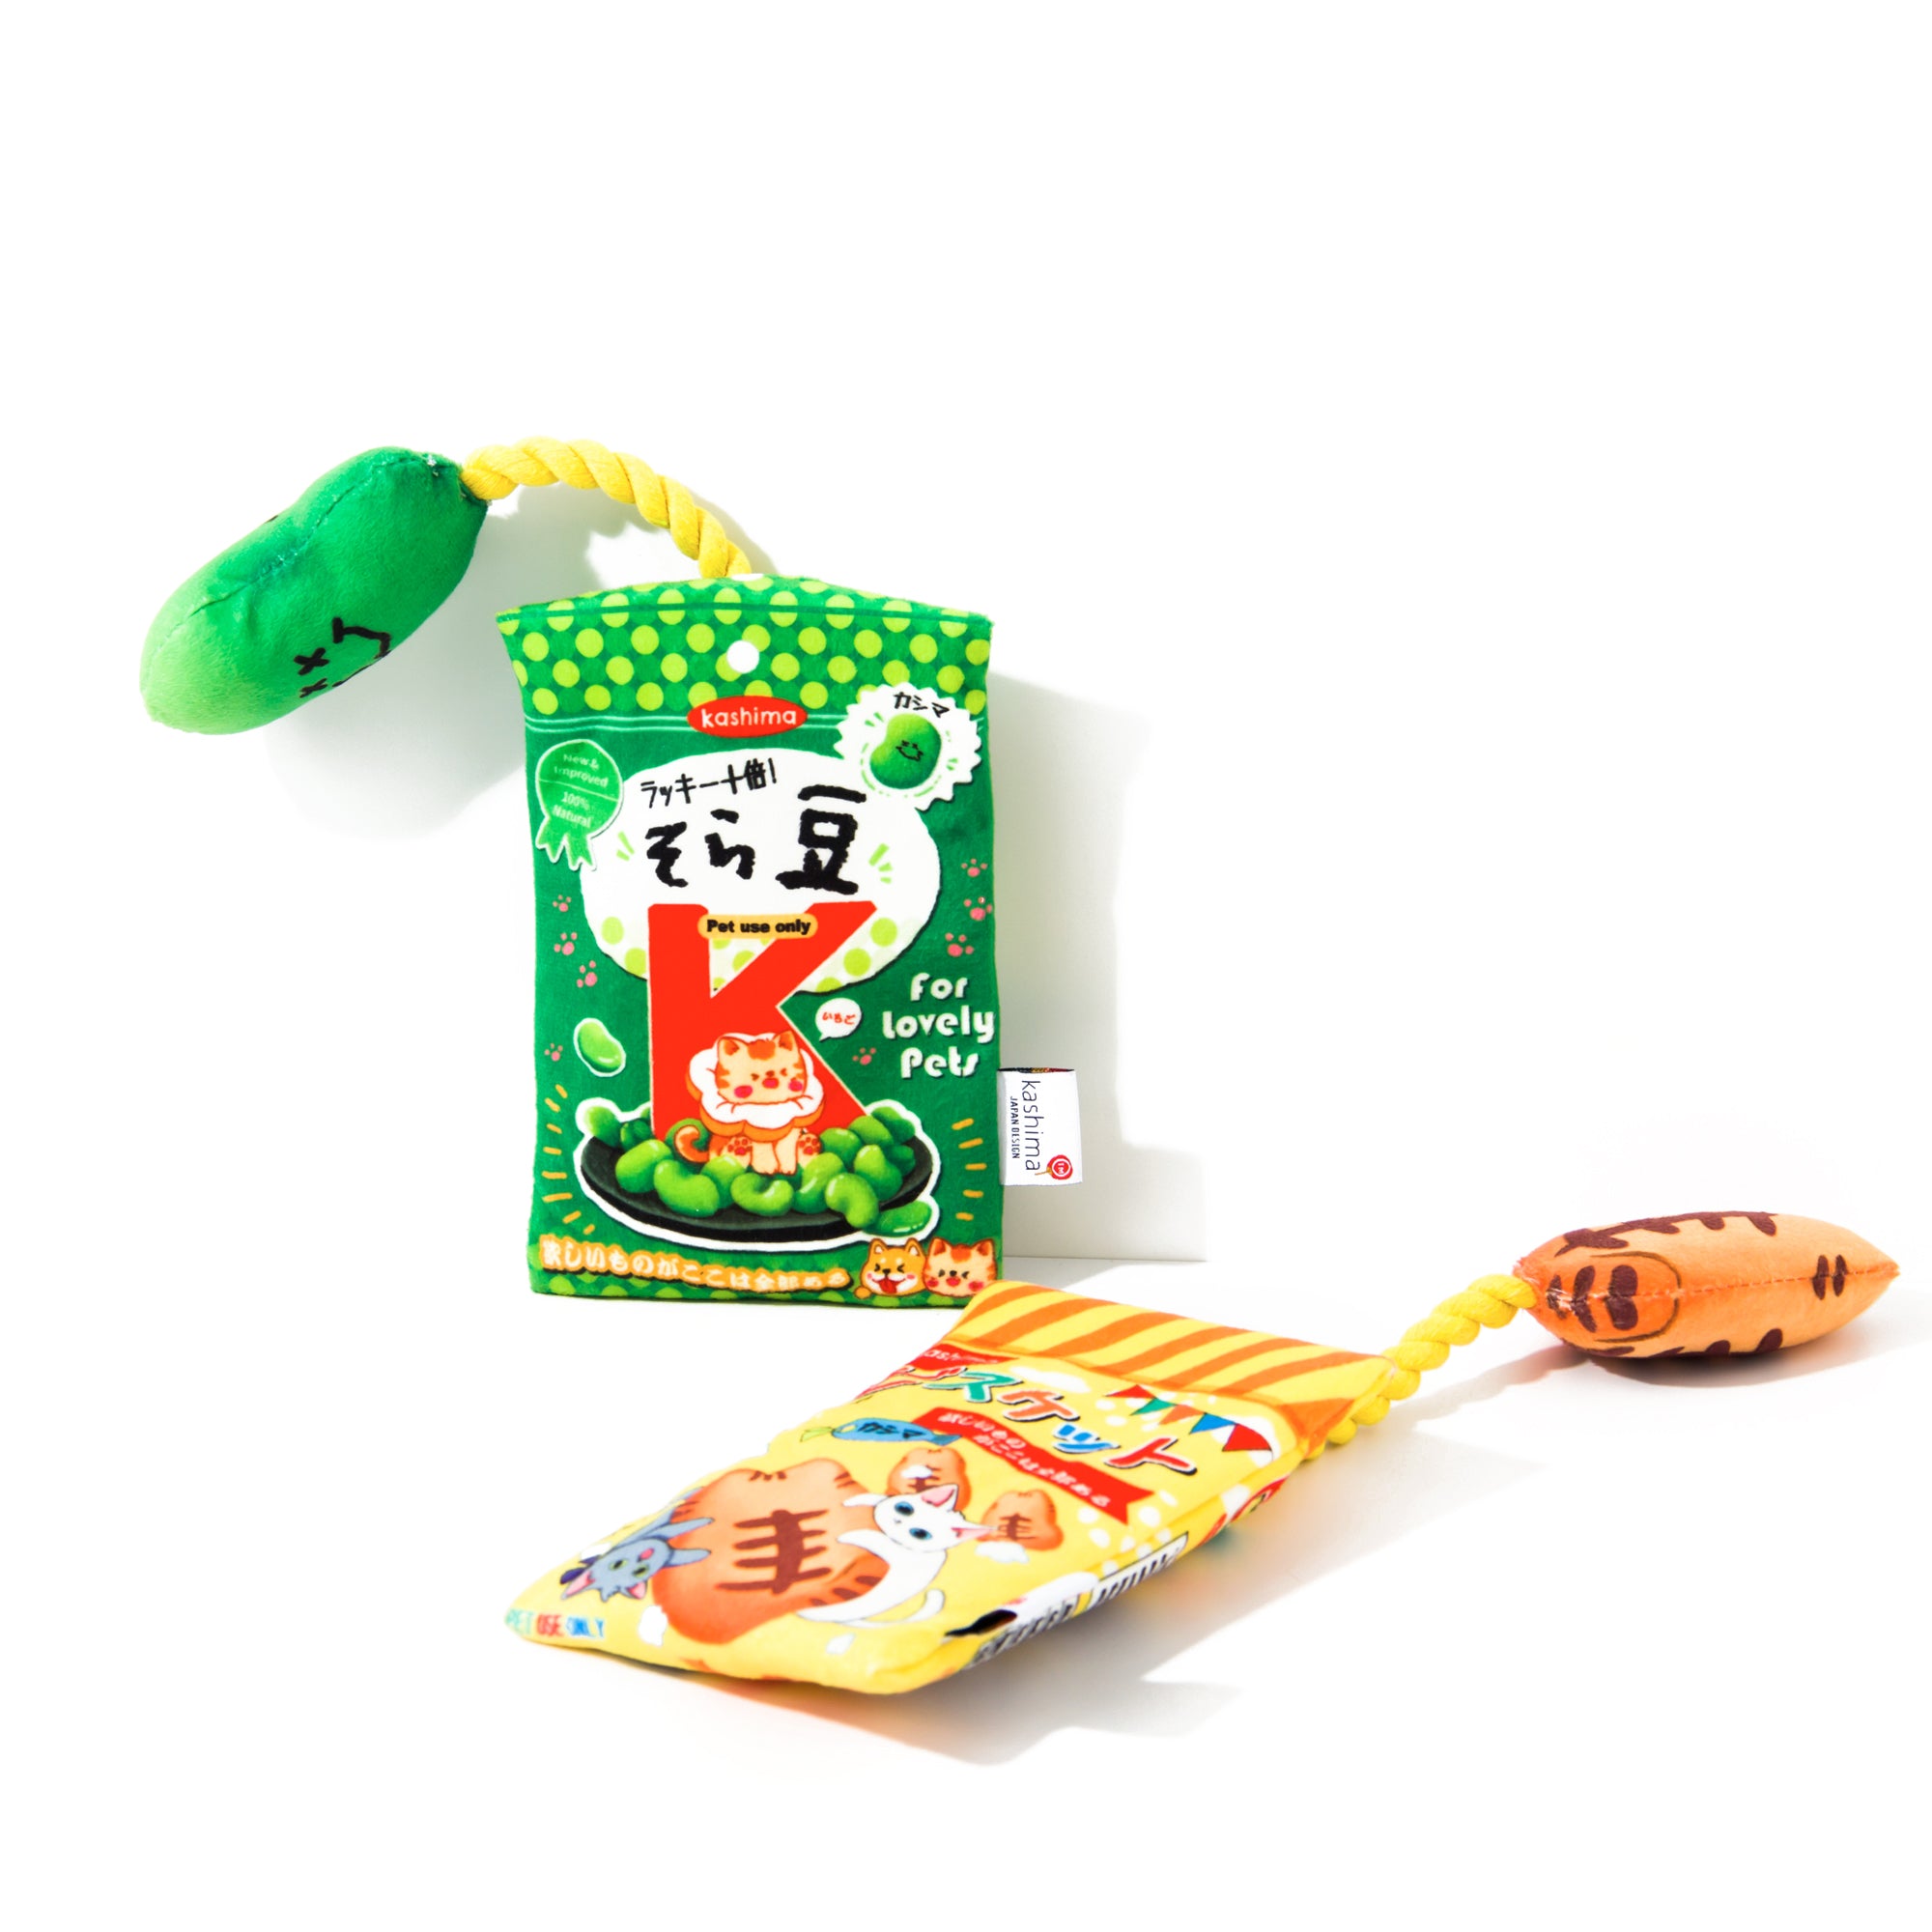 Kashima Japanese Bean and Biscuits Shaped Toy